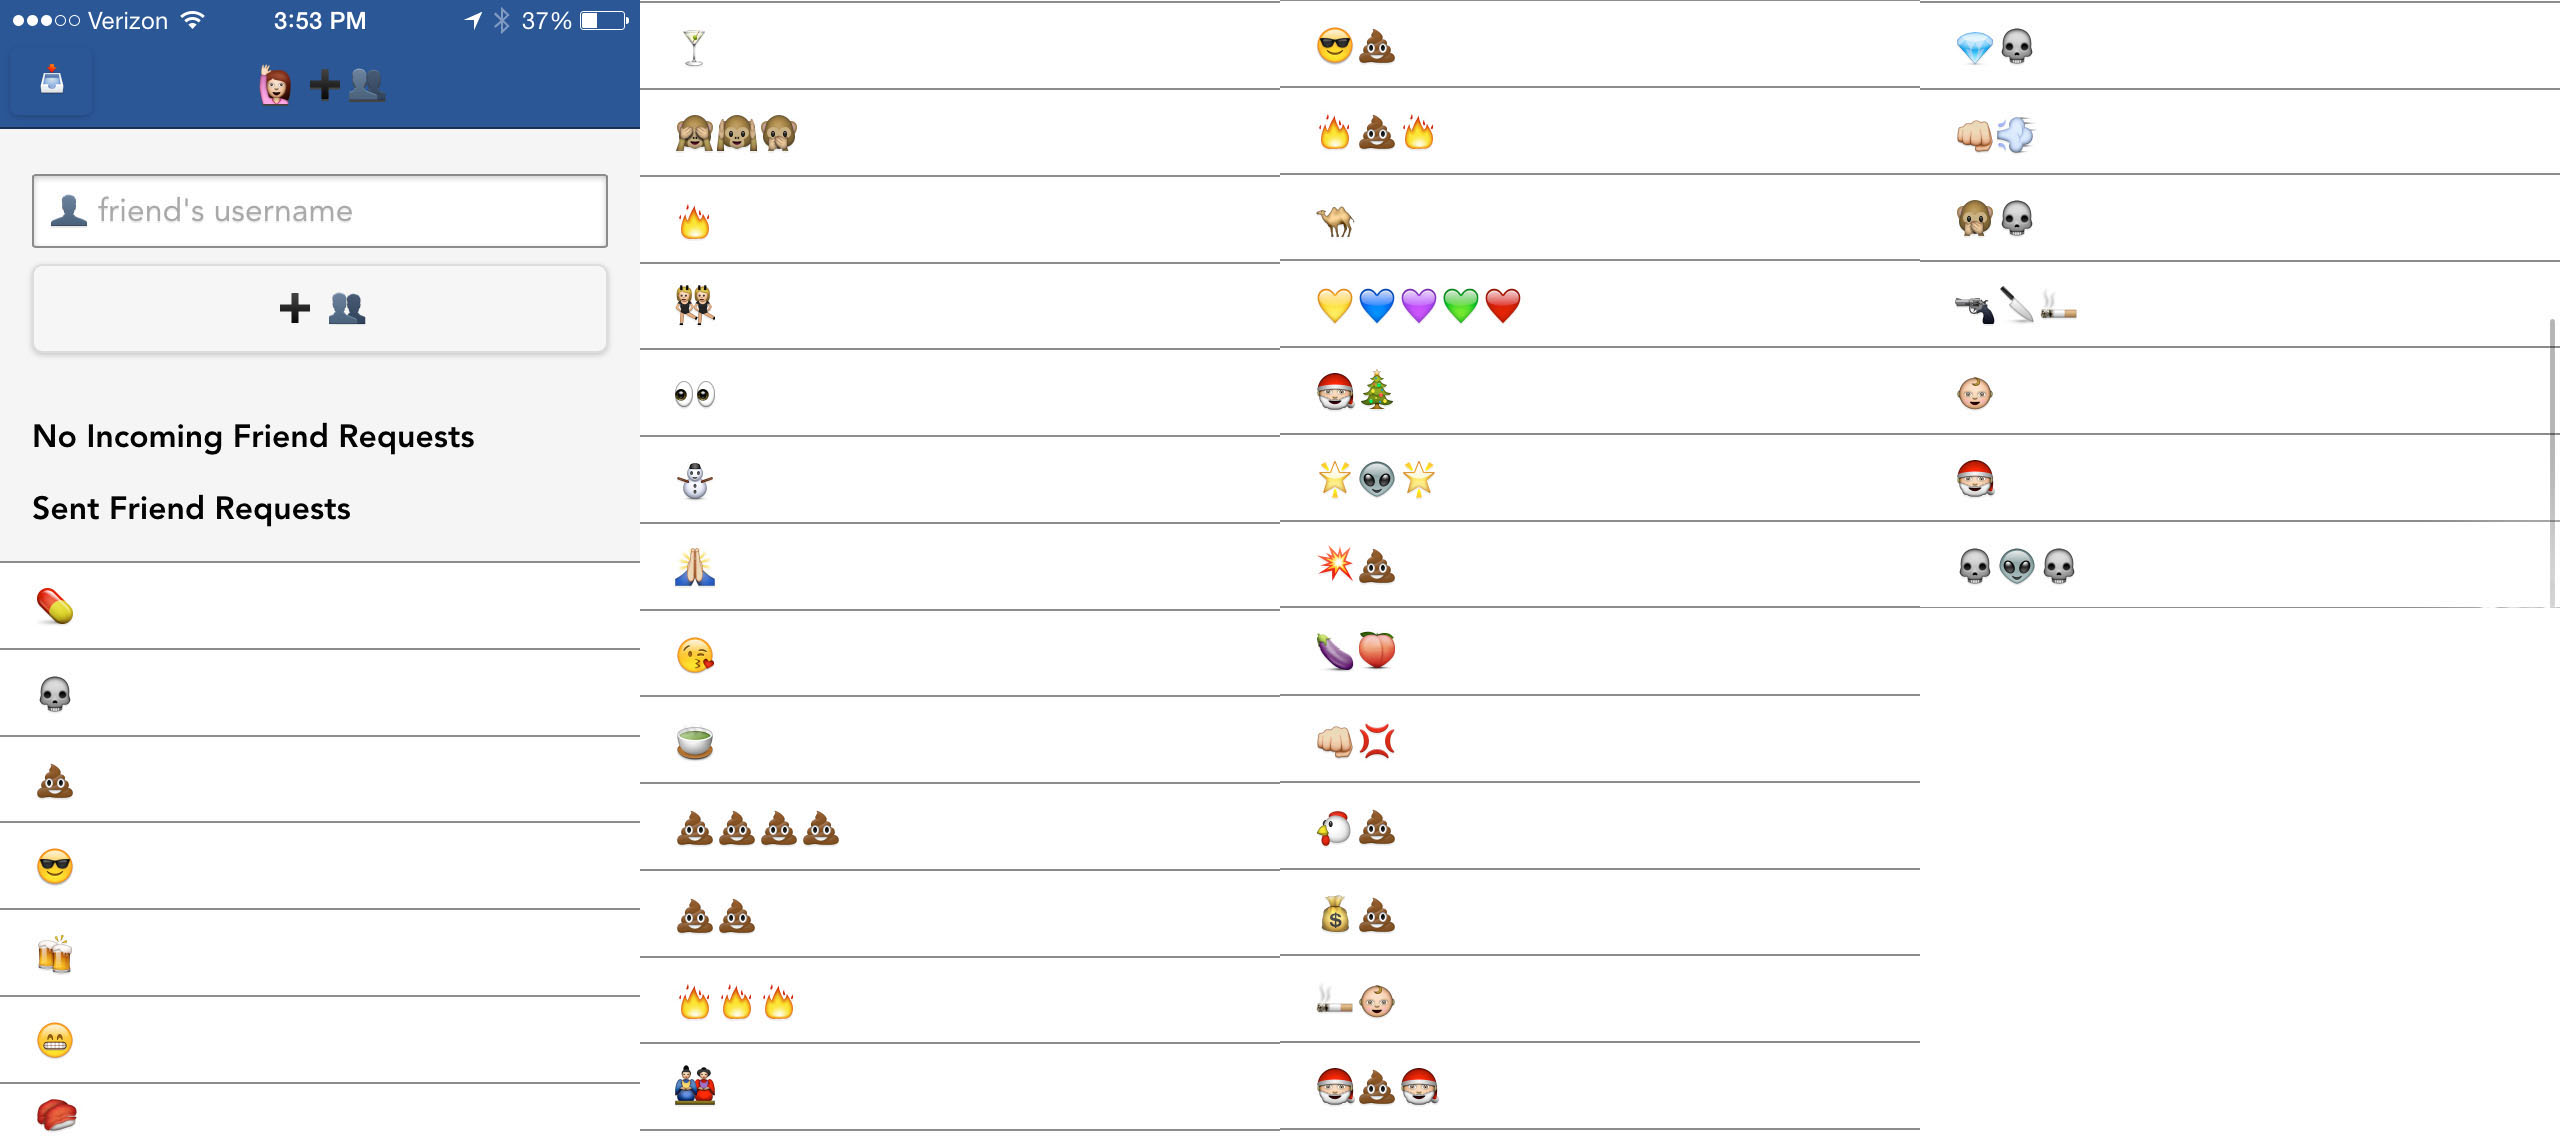 My Day On The Emoji-Only Social Network, Translated (I Think)